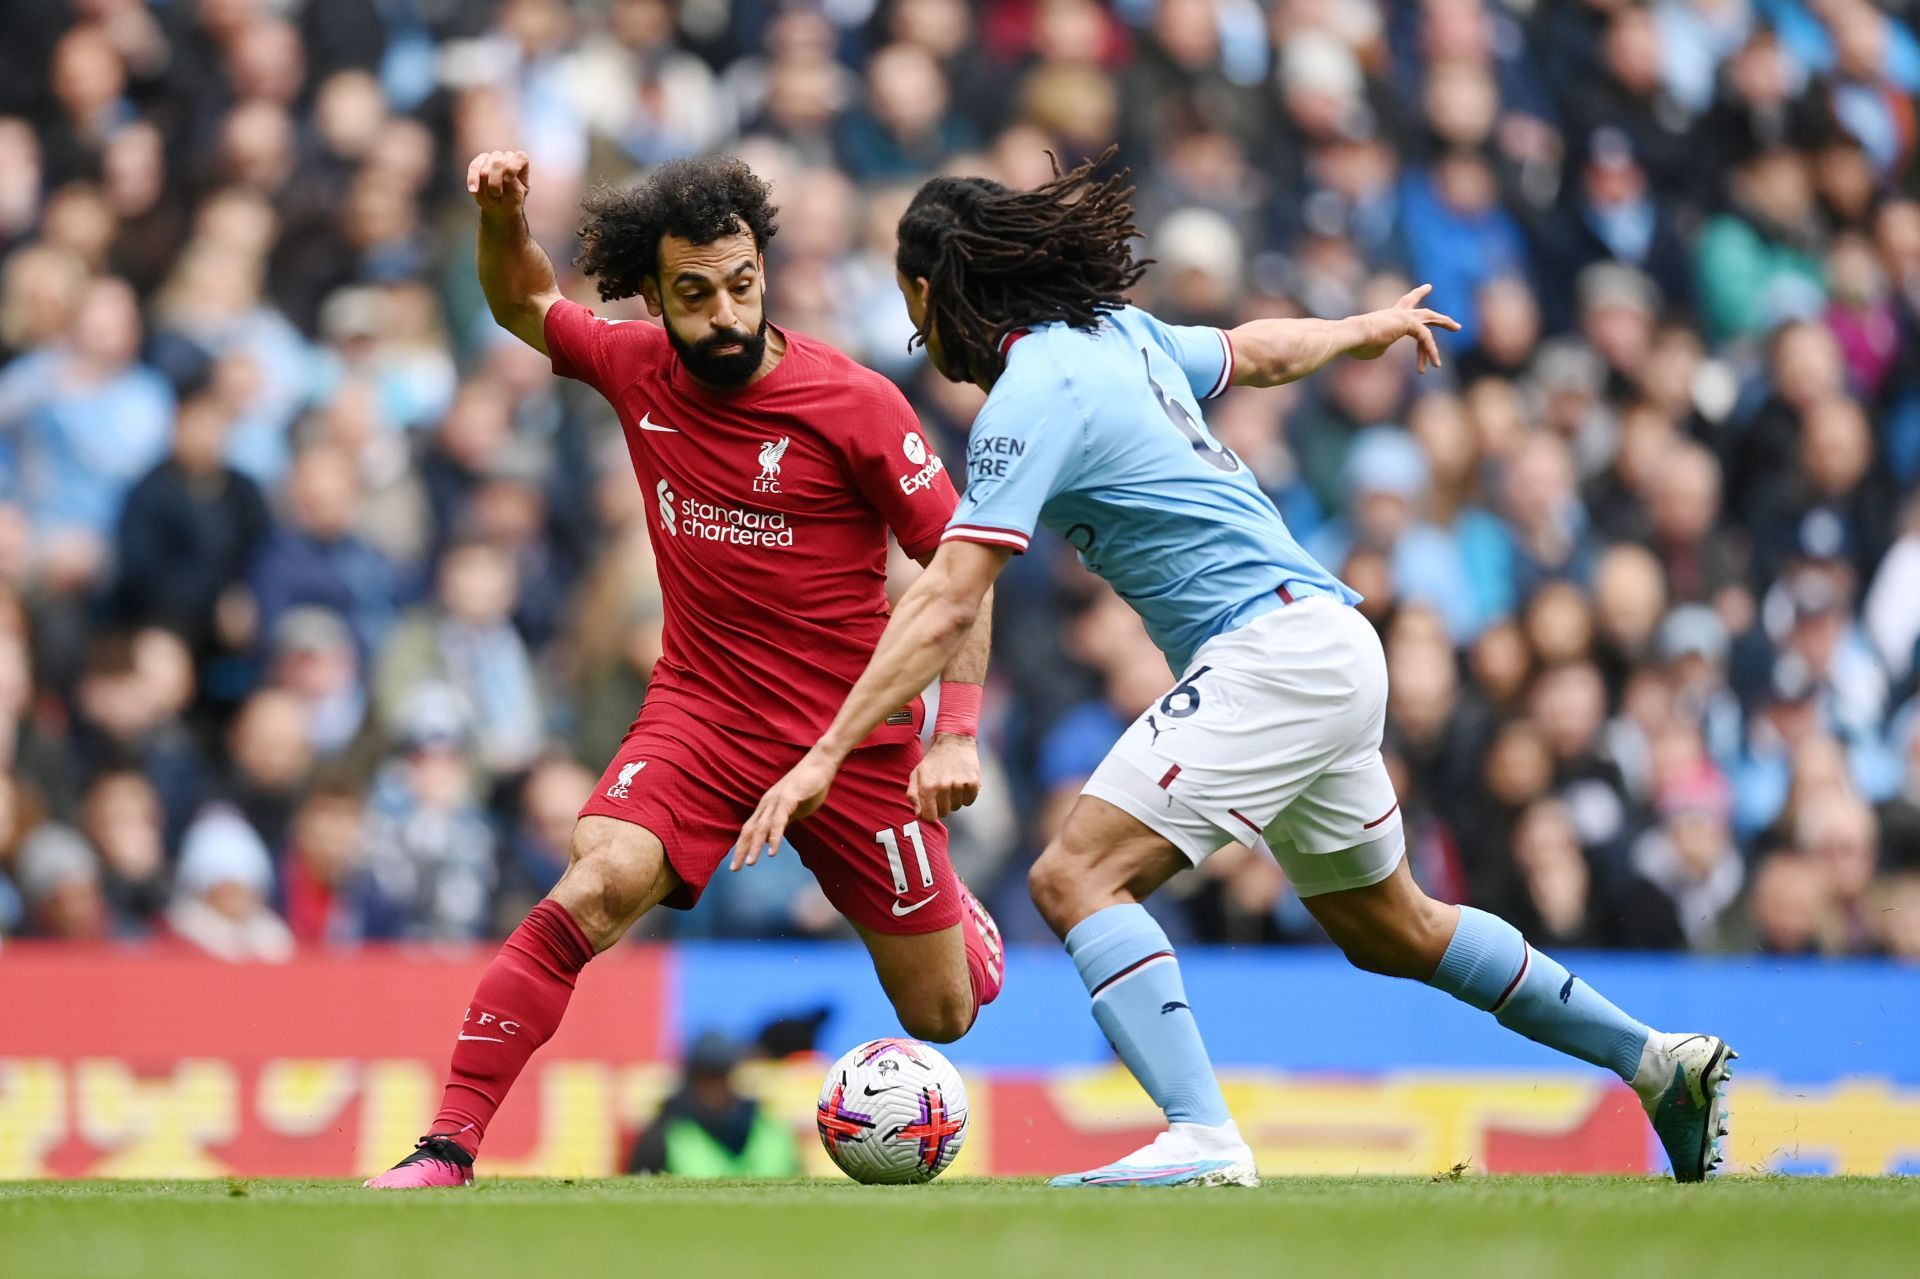 Salah (L) was the lone bright spark for Liverpool in their disappointing outing